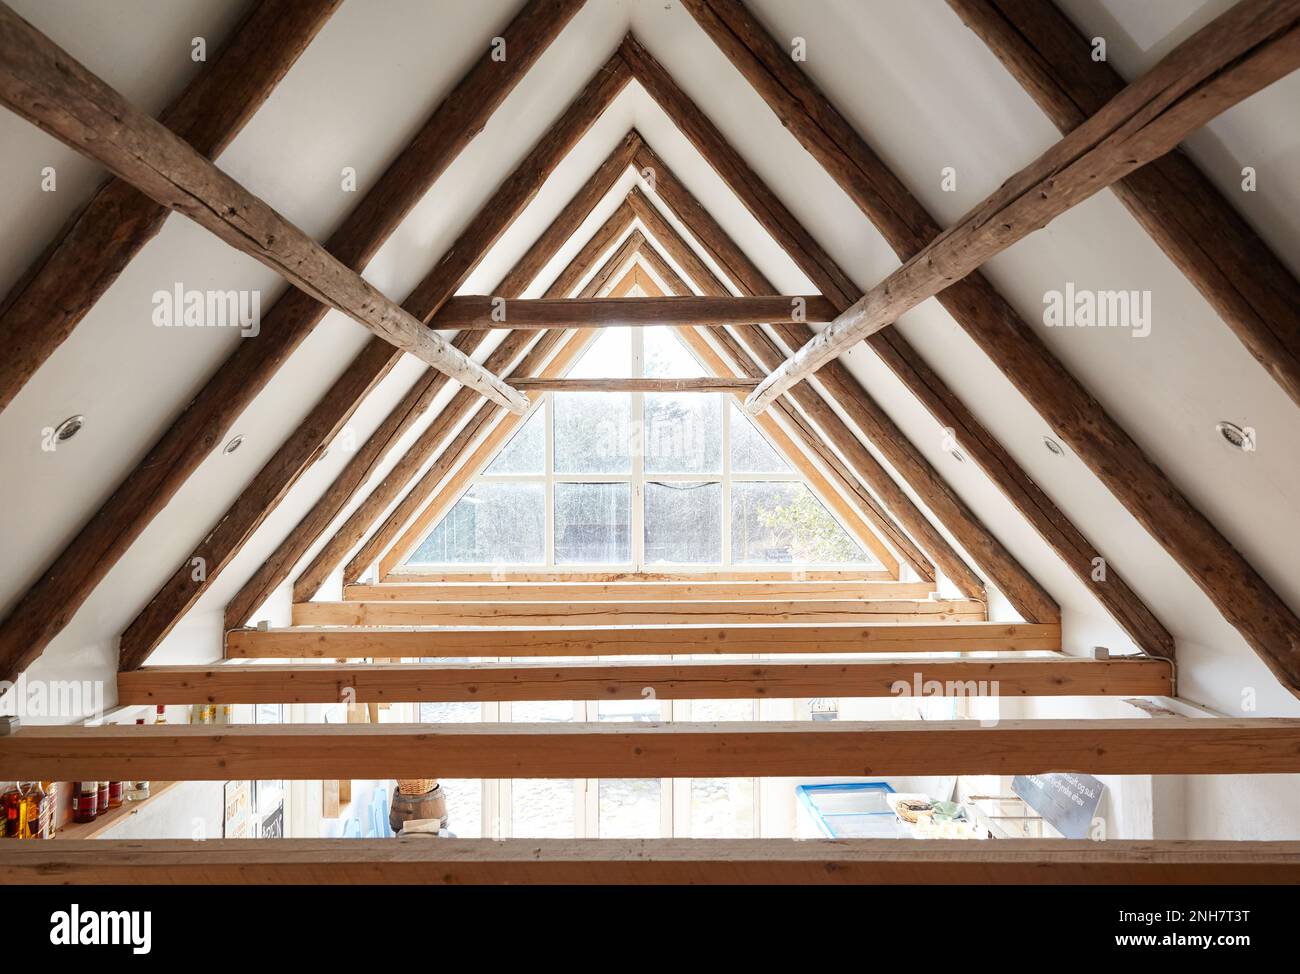 Very authentic architecture of a ceiling/attic, with visible brown frameworks, a big window makes it very bright and luminous. Huge ceiling high. Stock Photo